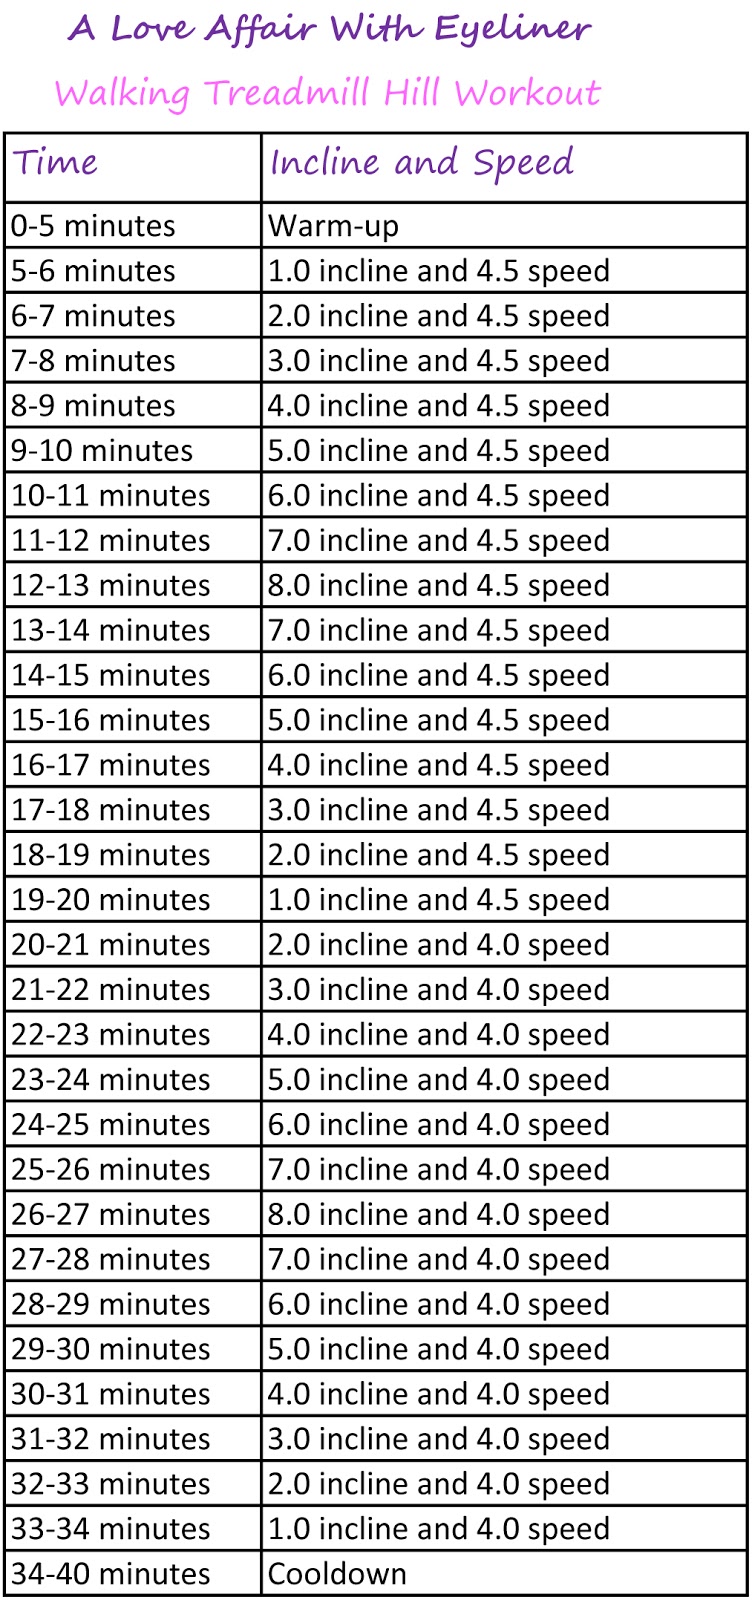 5 Day Treadmill hill workout for Beginner